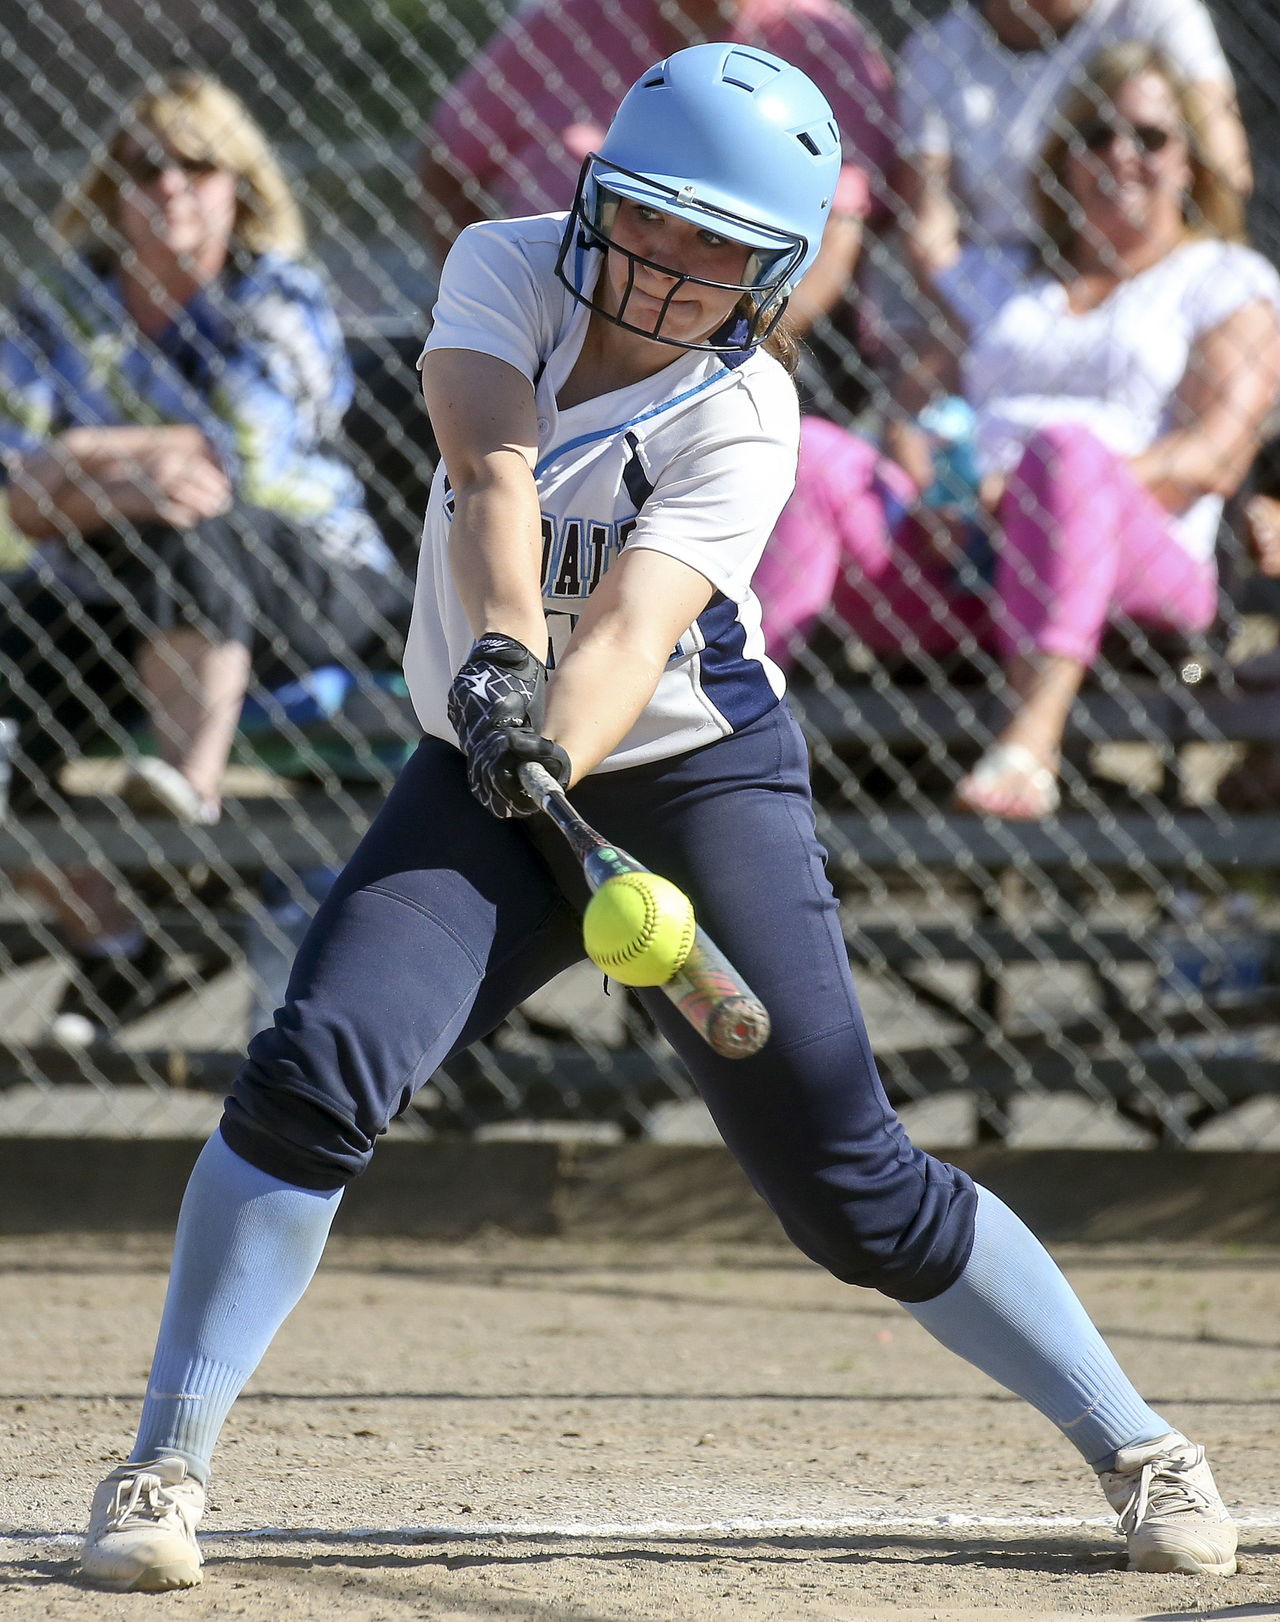 Meadowdale’s Emma Helm is hitting .581 this season, with 10 doubles, four triples, 10 home runs, 54 RBI and just four strikeouts in 74 at-bats.